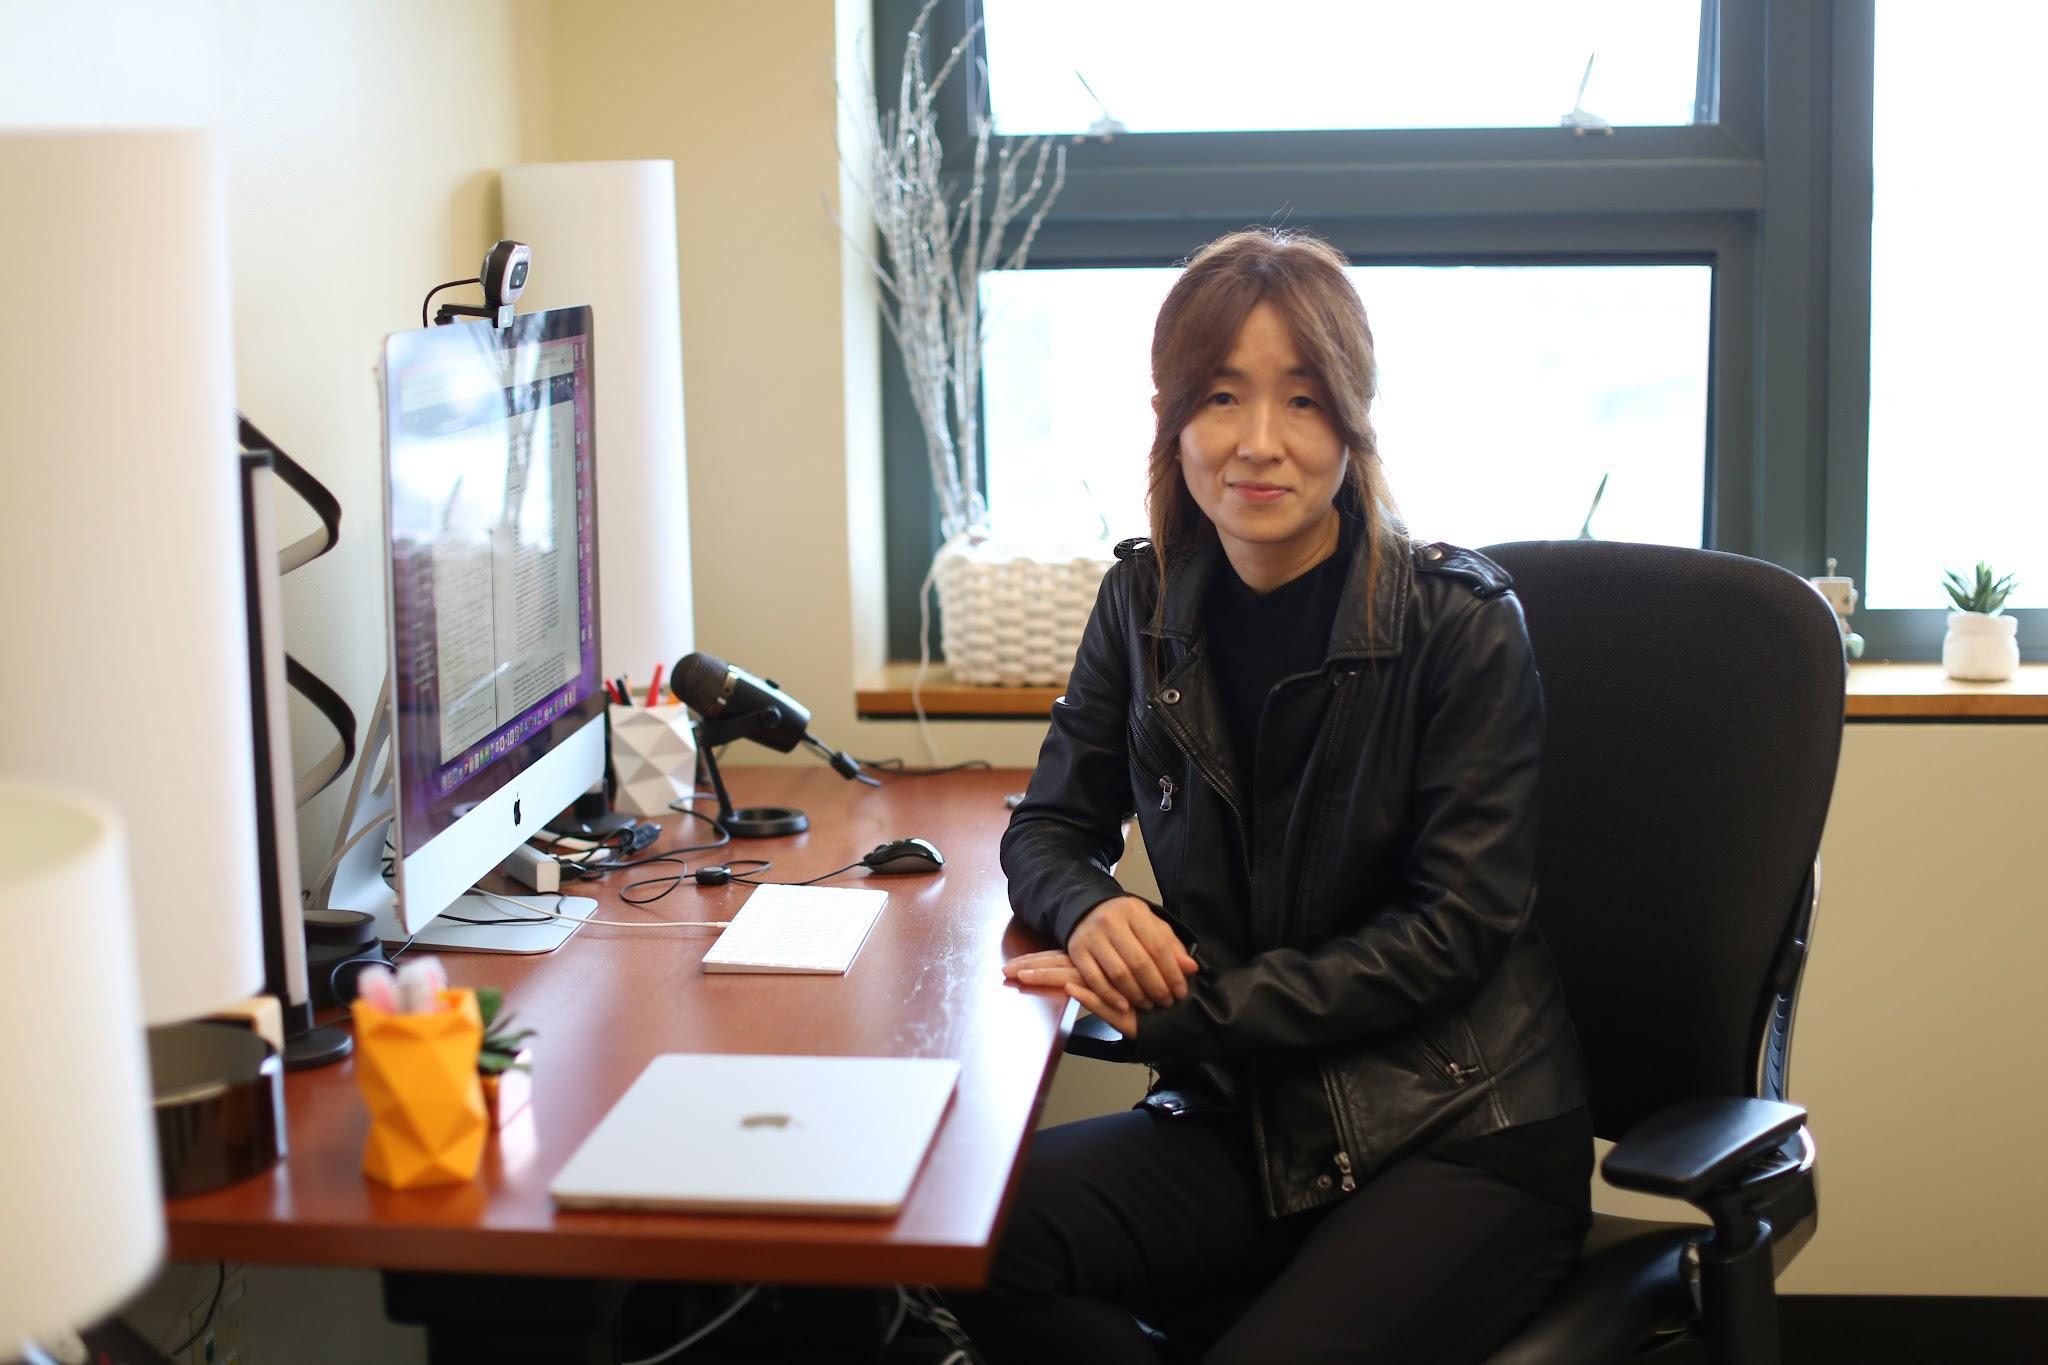 Computer scientist Yejin Choi sits at a desk. Full text in caption.